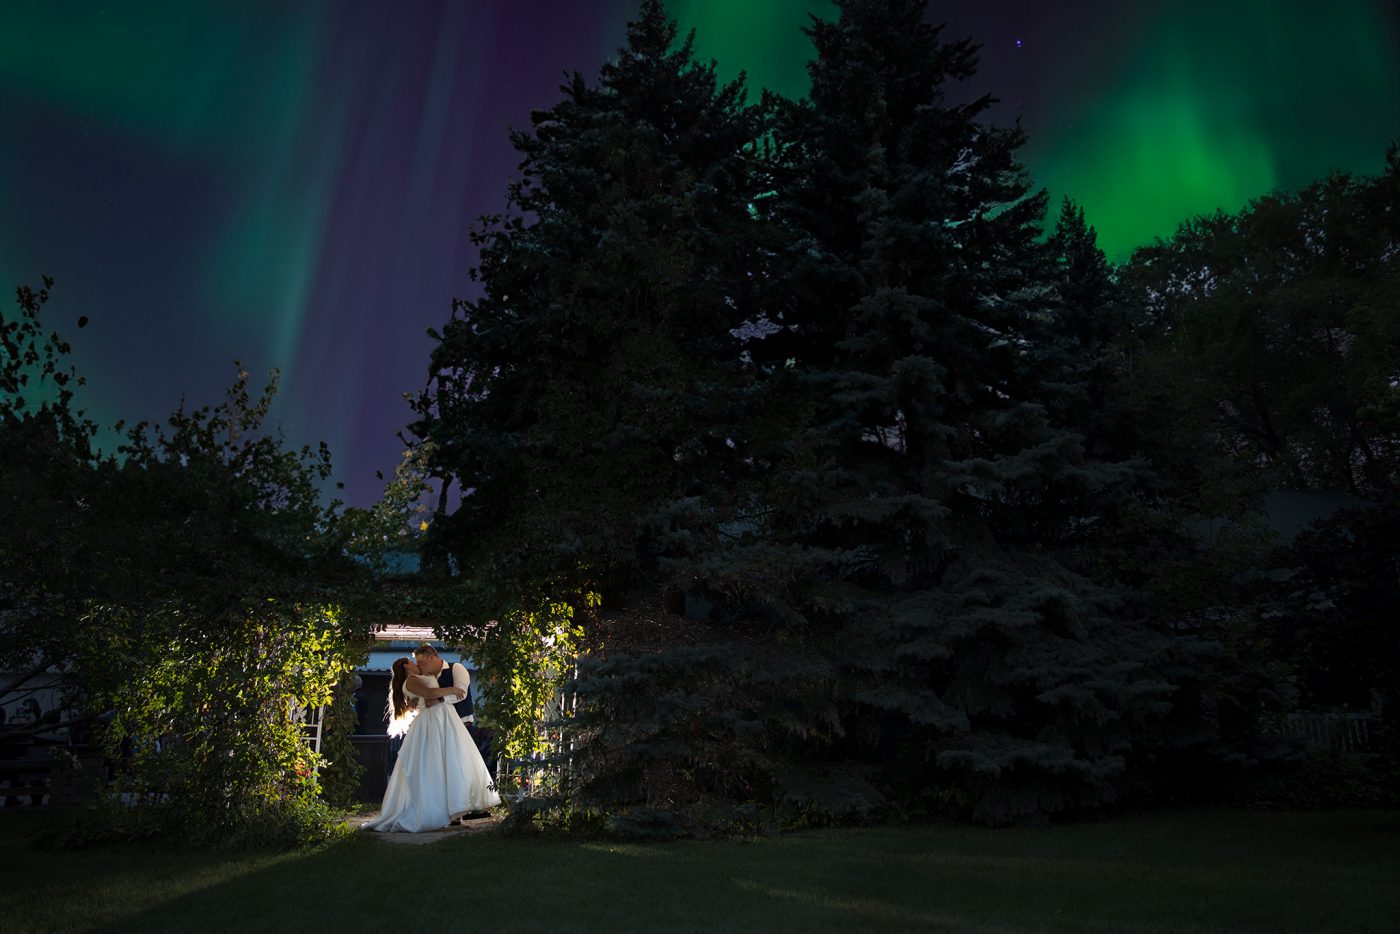 Mike dips Nicky under a arbour being back lit under the sky with dancing northern lights